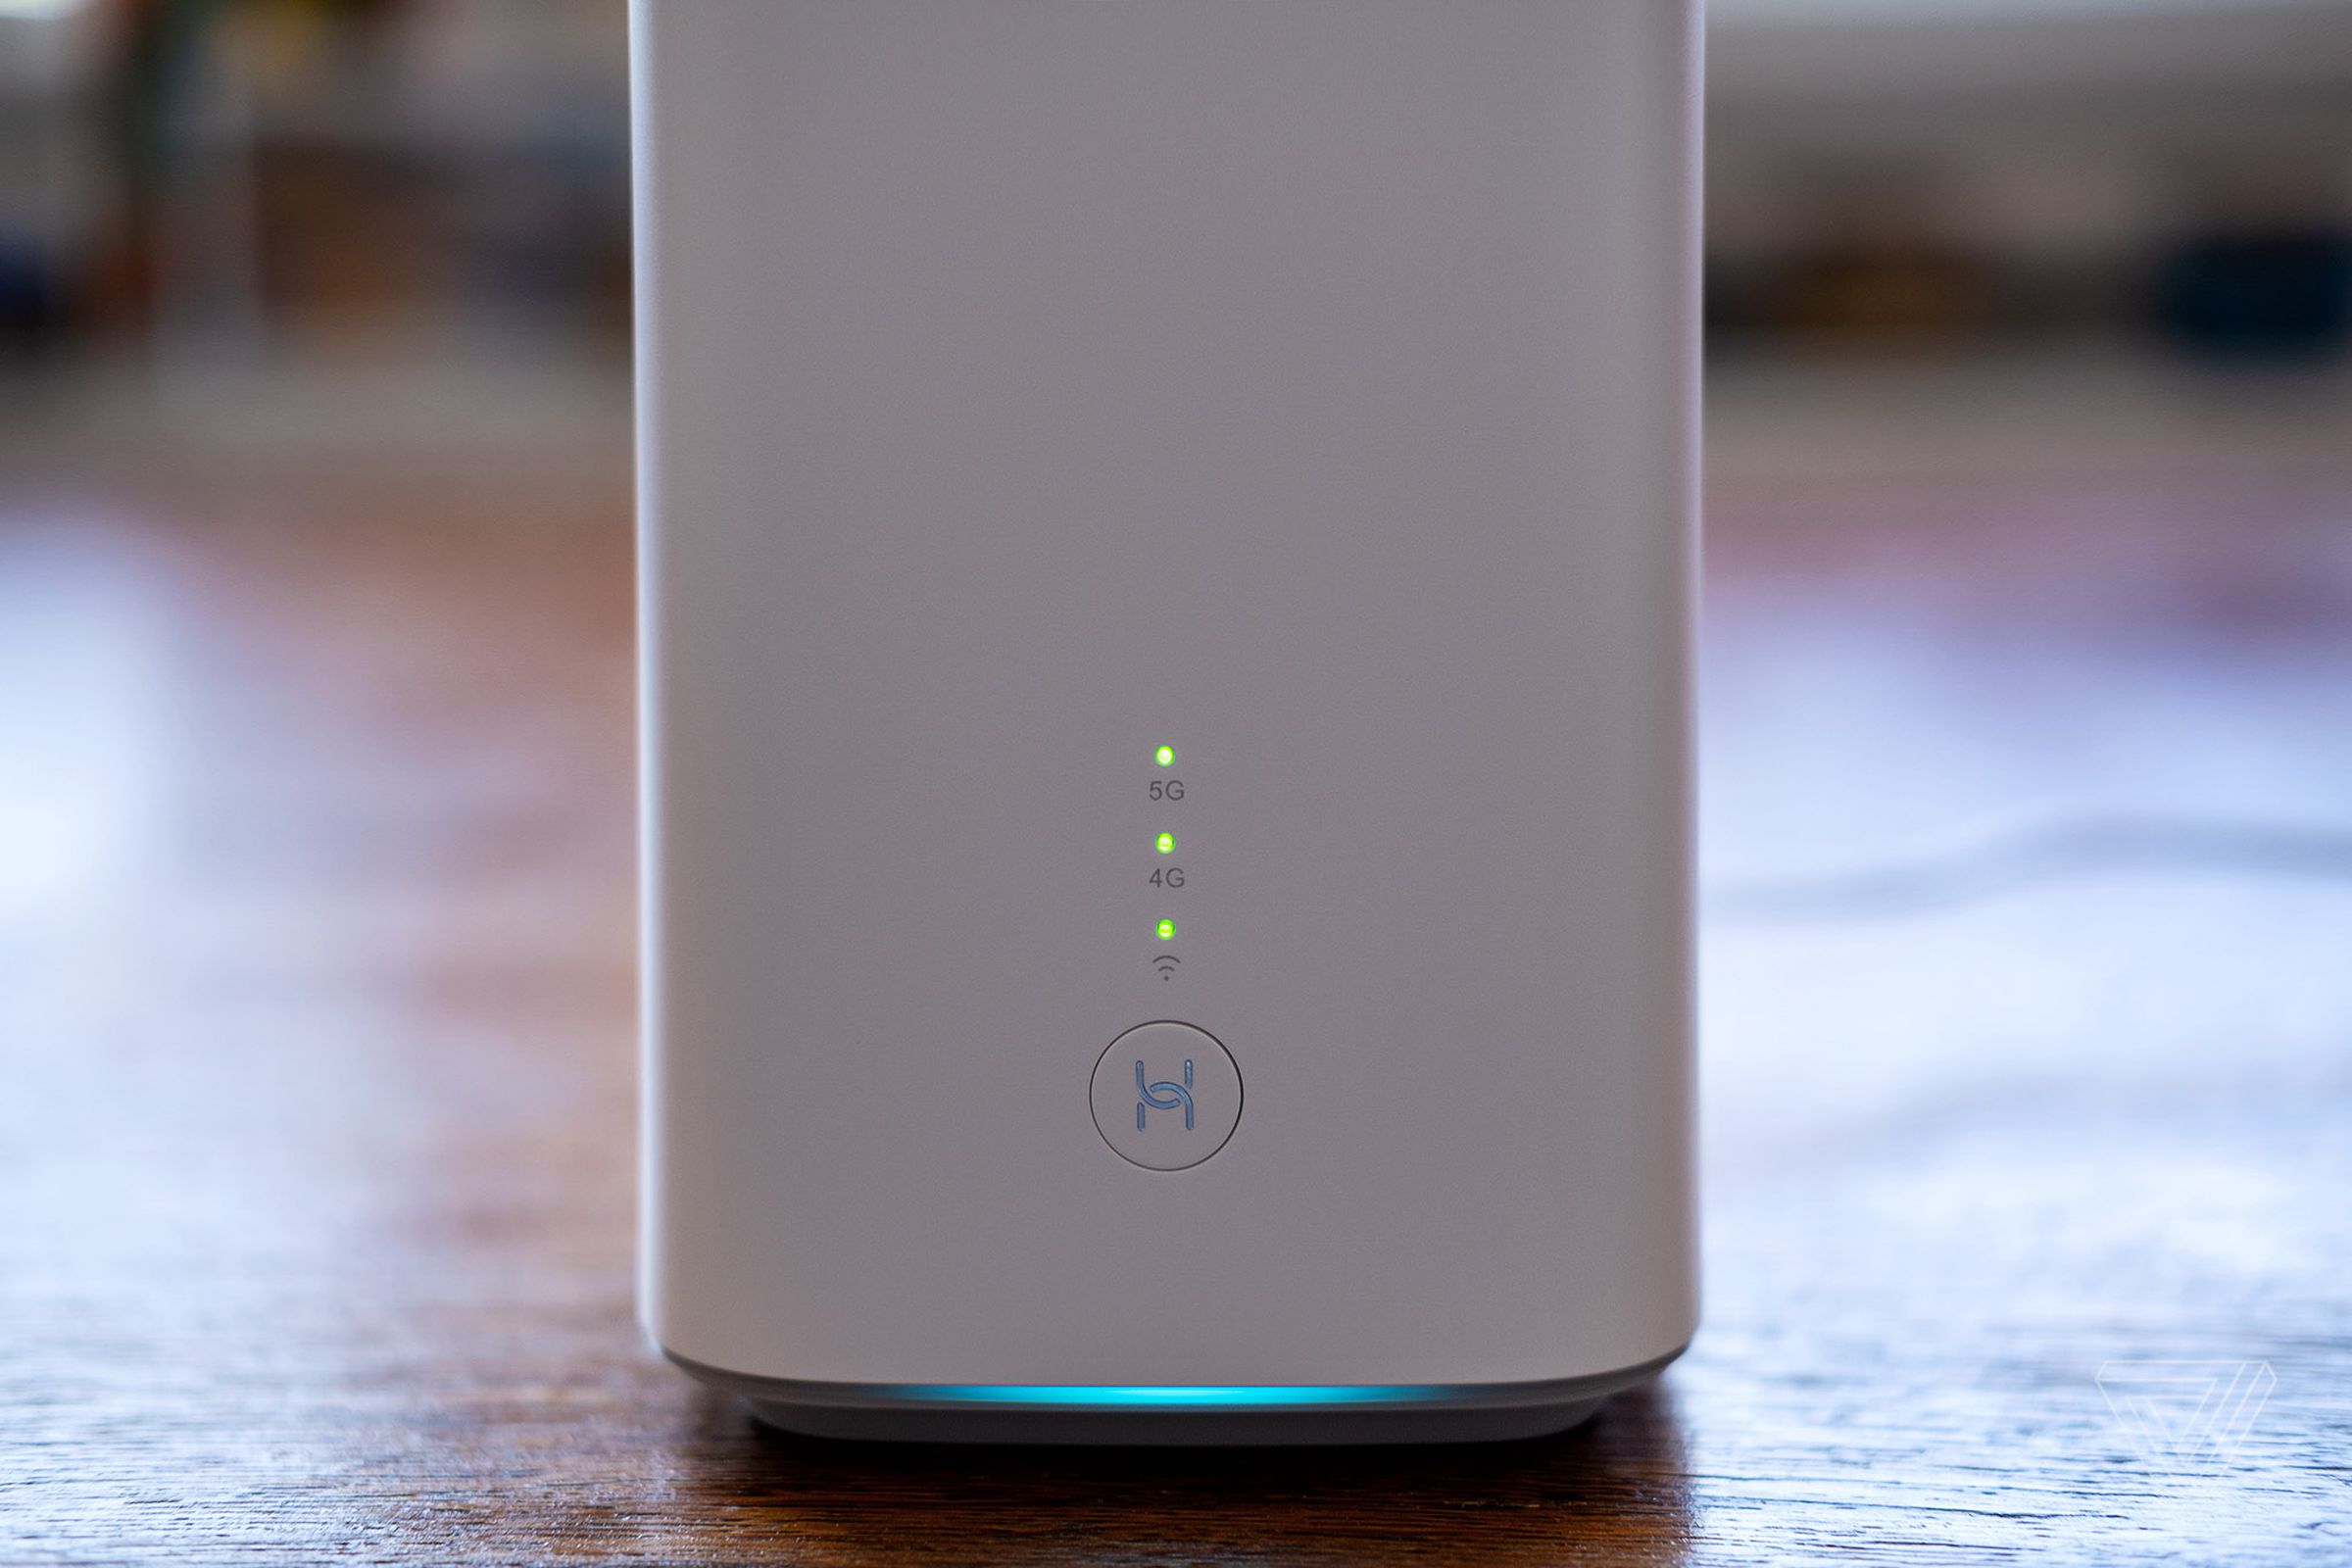 The three lights on the base of the router show which networks it’s connected to.